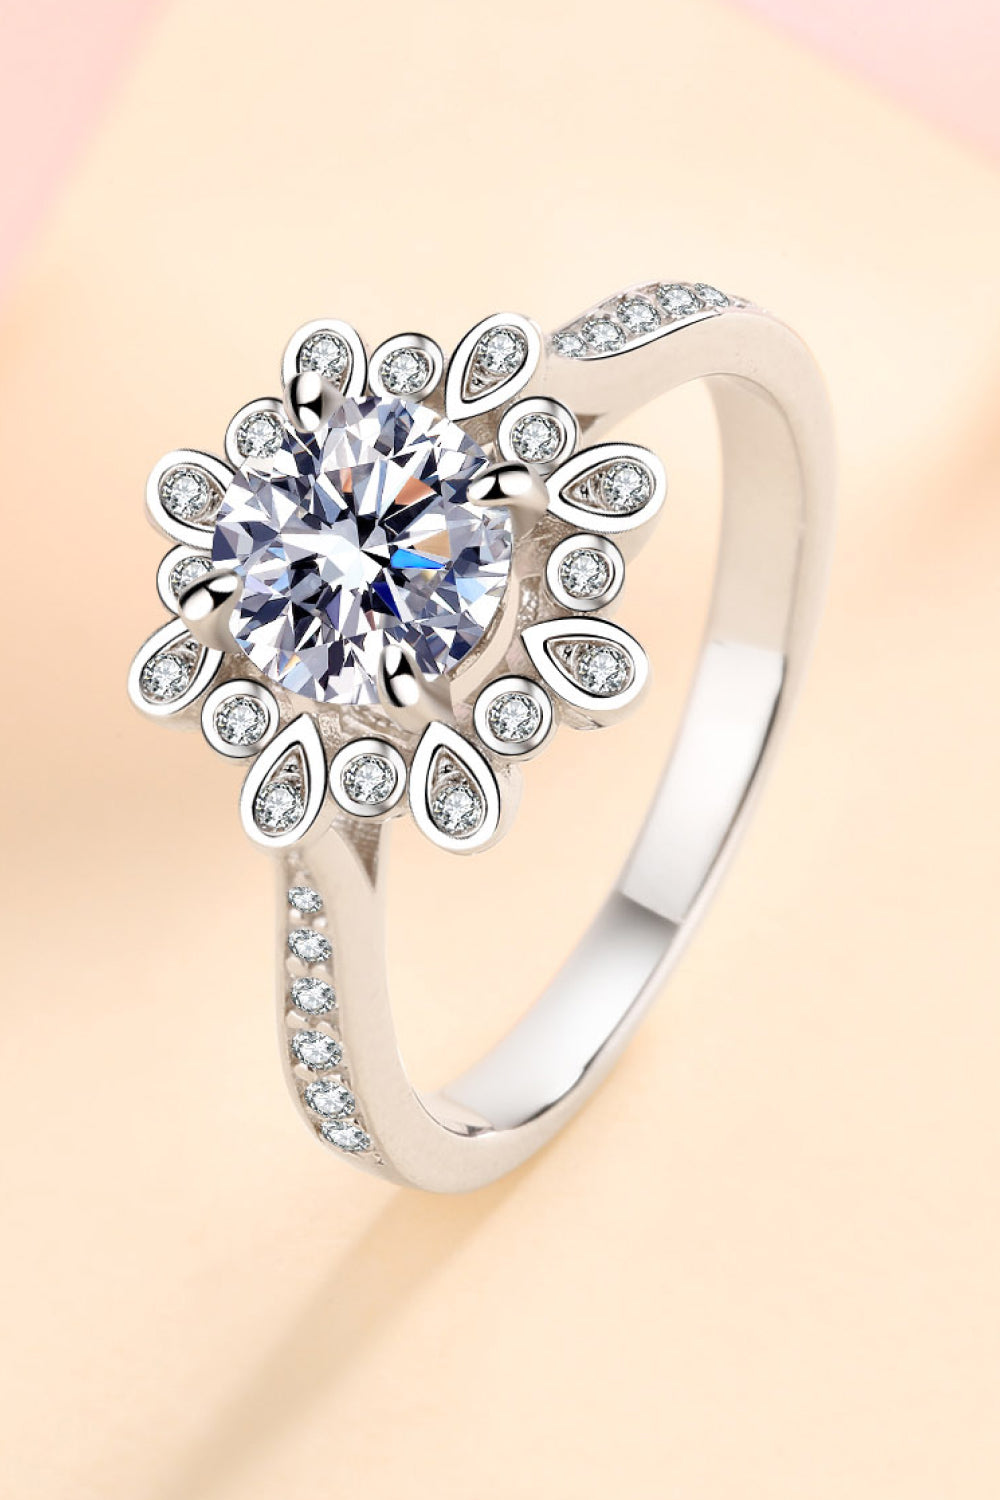 1 Carat Moissanite Can't Stop Your Shine 925 Sterling Silver Ring